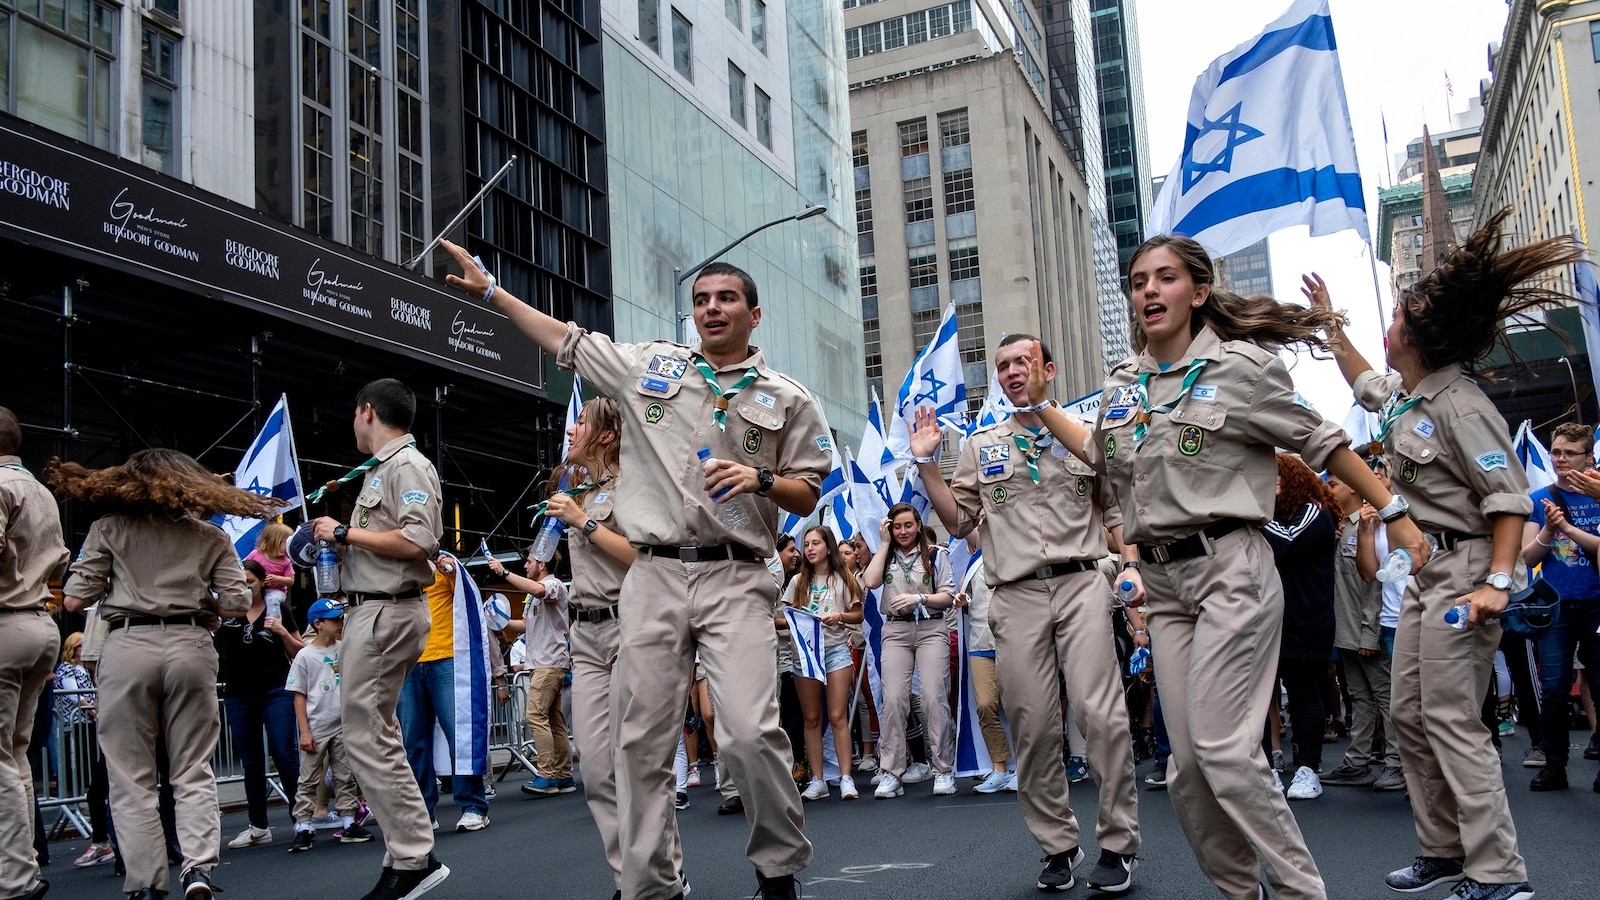 Solidarity Takes Center Stage at NYC's Israel Parade Amid Gaza Conflict